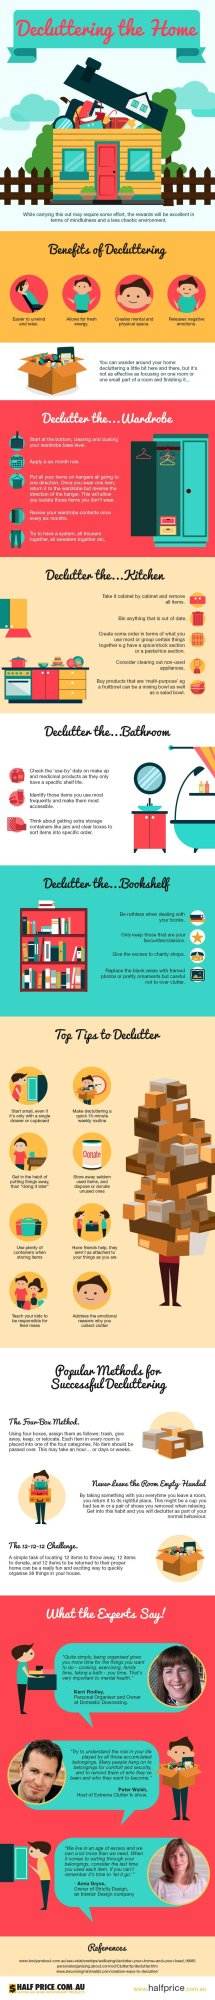 28 Awesome Tips on How To Declutter your Home (Infographic) luxury homes